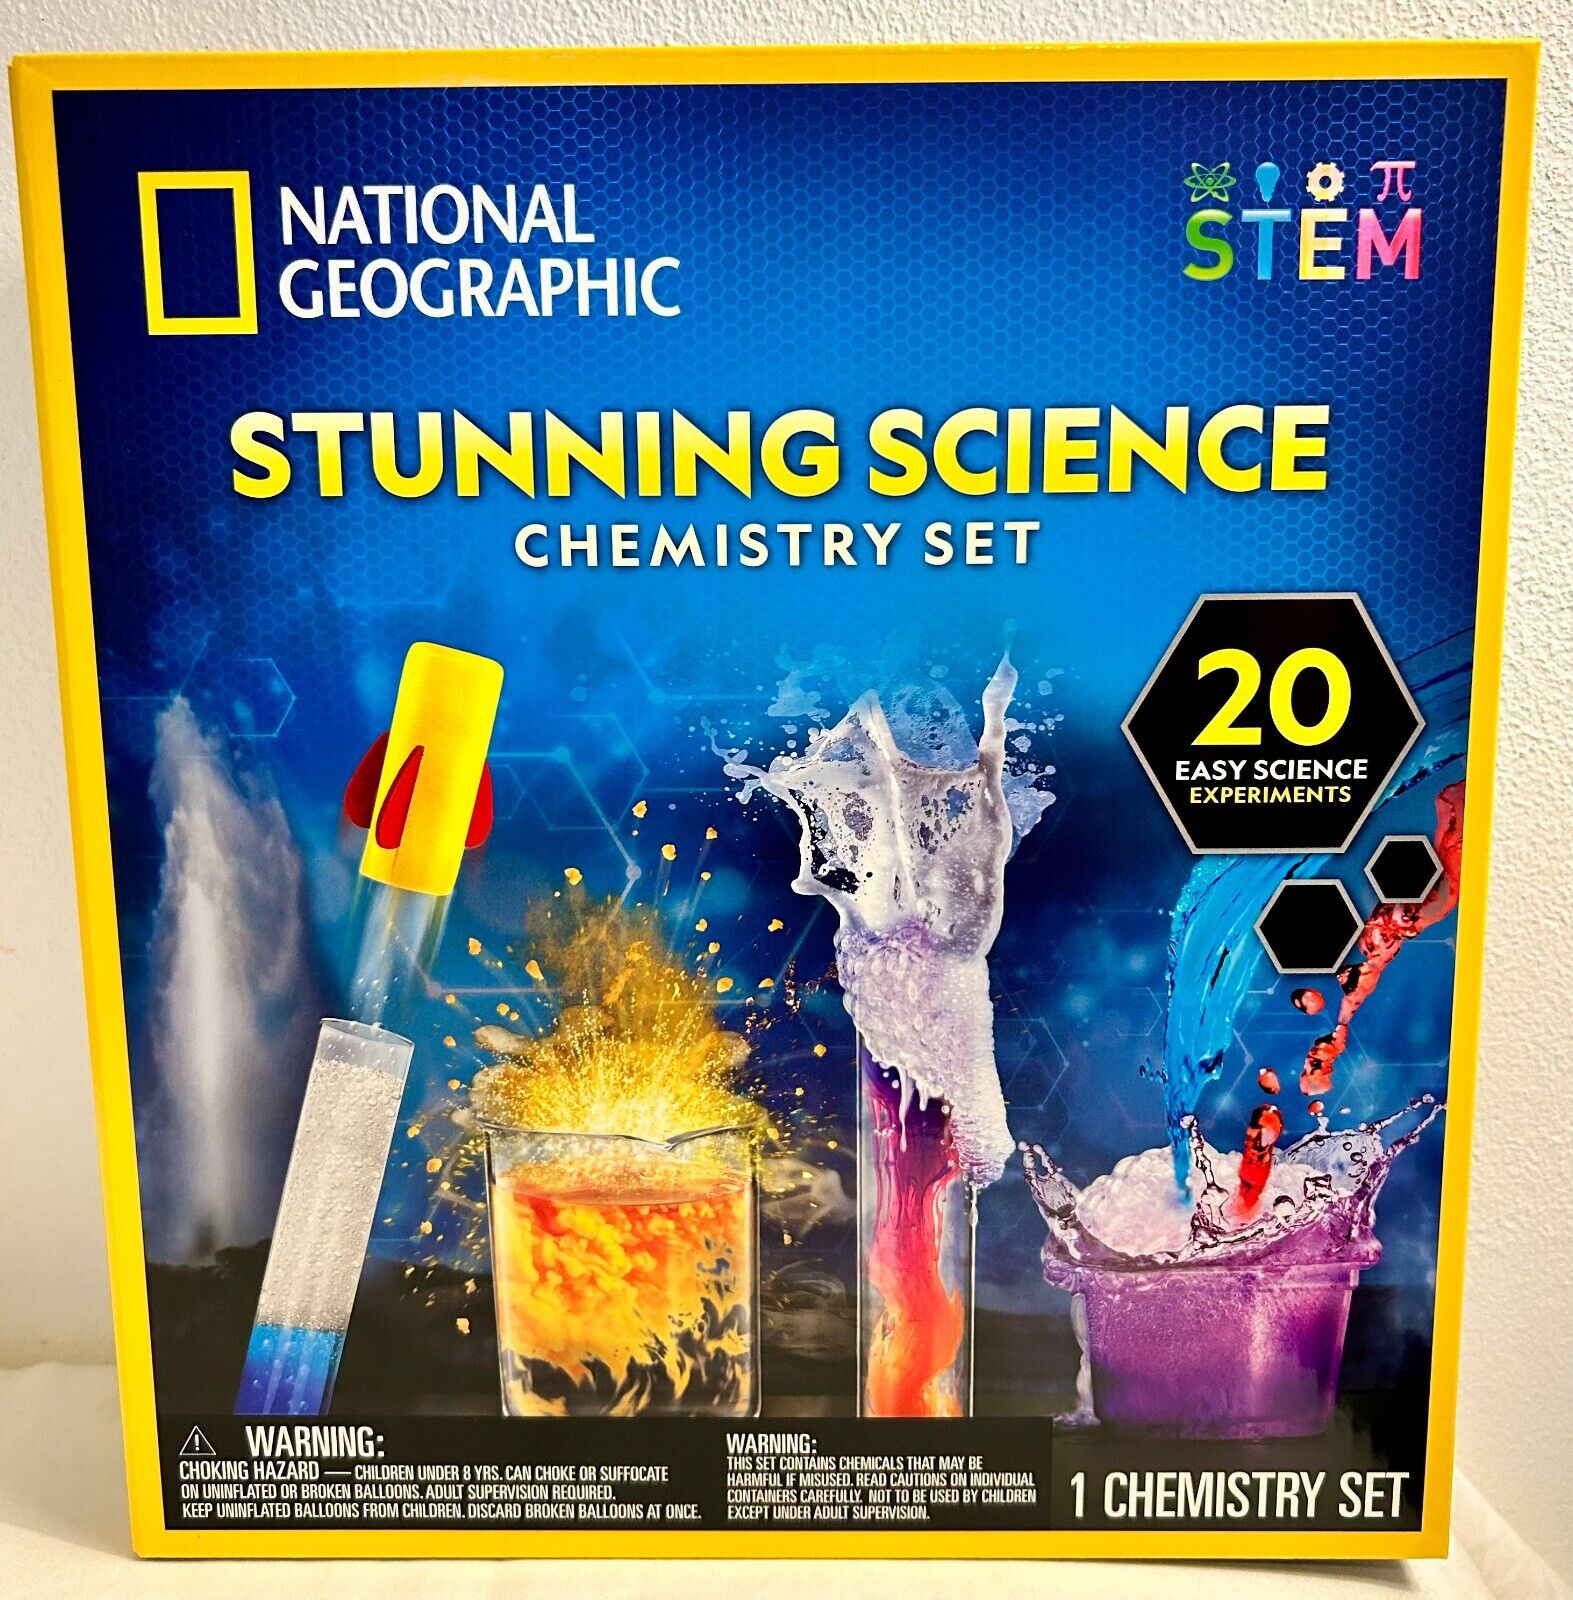 National Geographic Stunning Science Chemistry Set 20 Easy Science Experiments